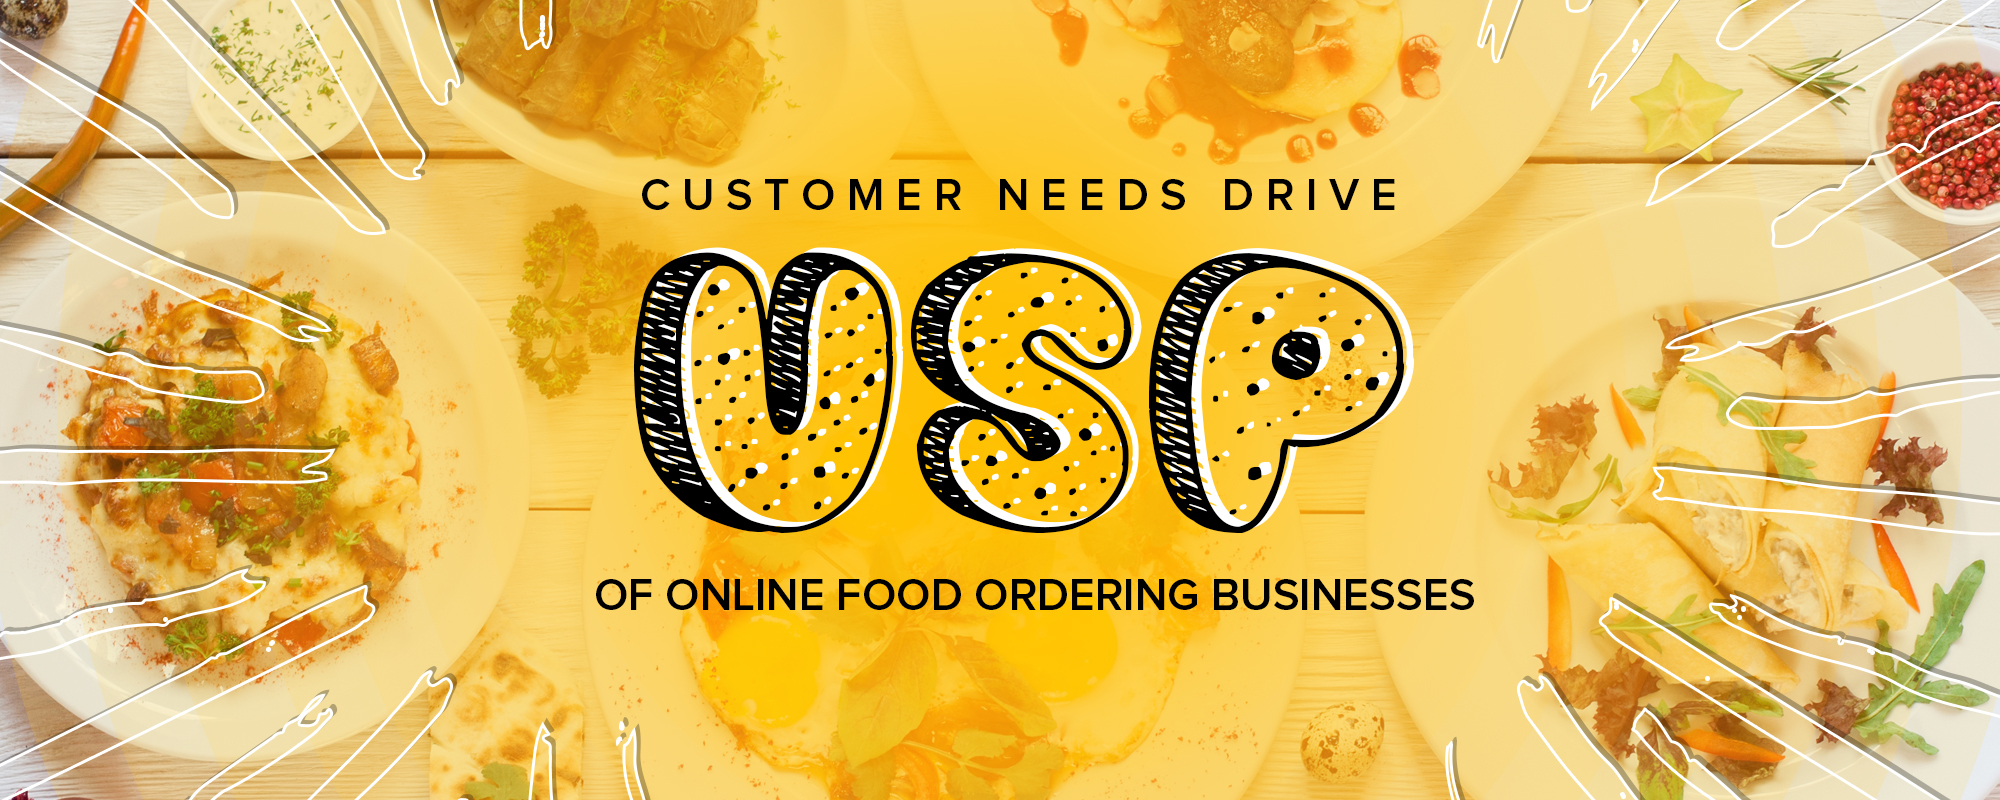 Tap into Customers’ Needs to Find a Solid USP for Your Online Food Ordering Startup